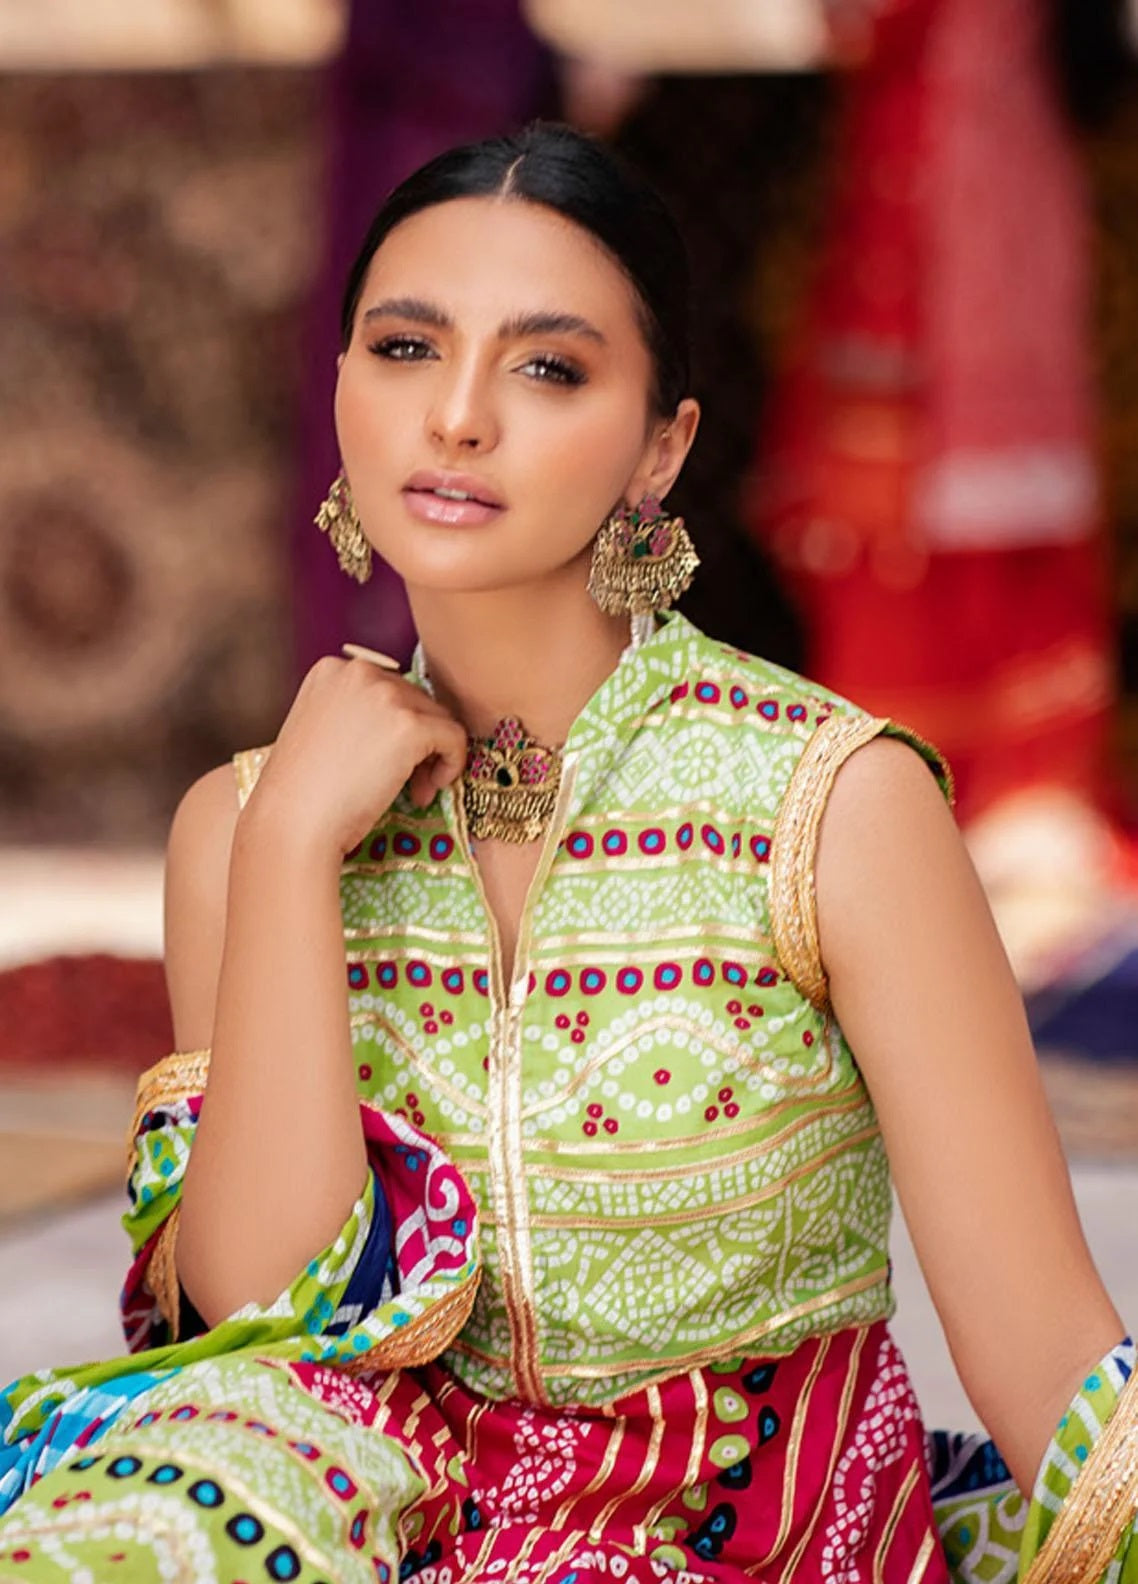 Monsoon by Al Zohaib Printed Lawn Suits Unstitched 3 Piece - 2C - Summer Collection